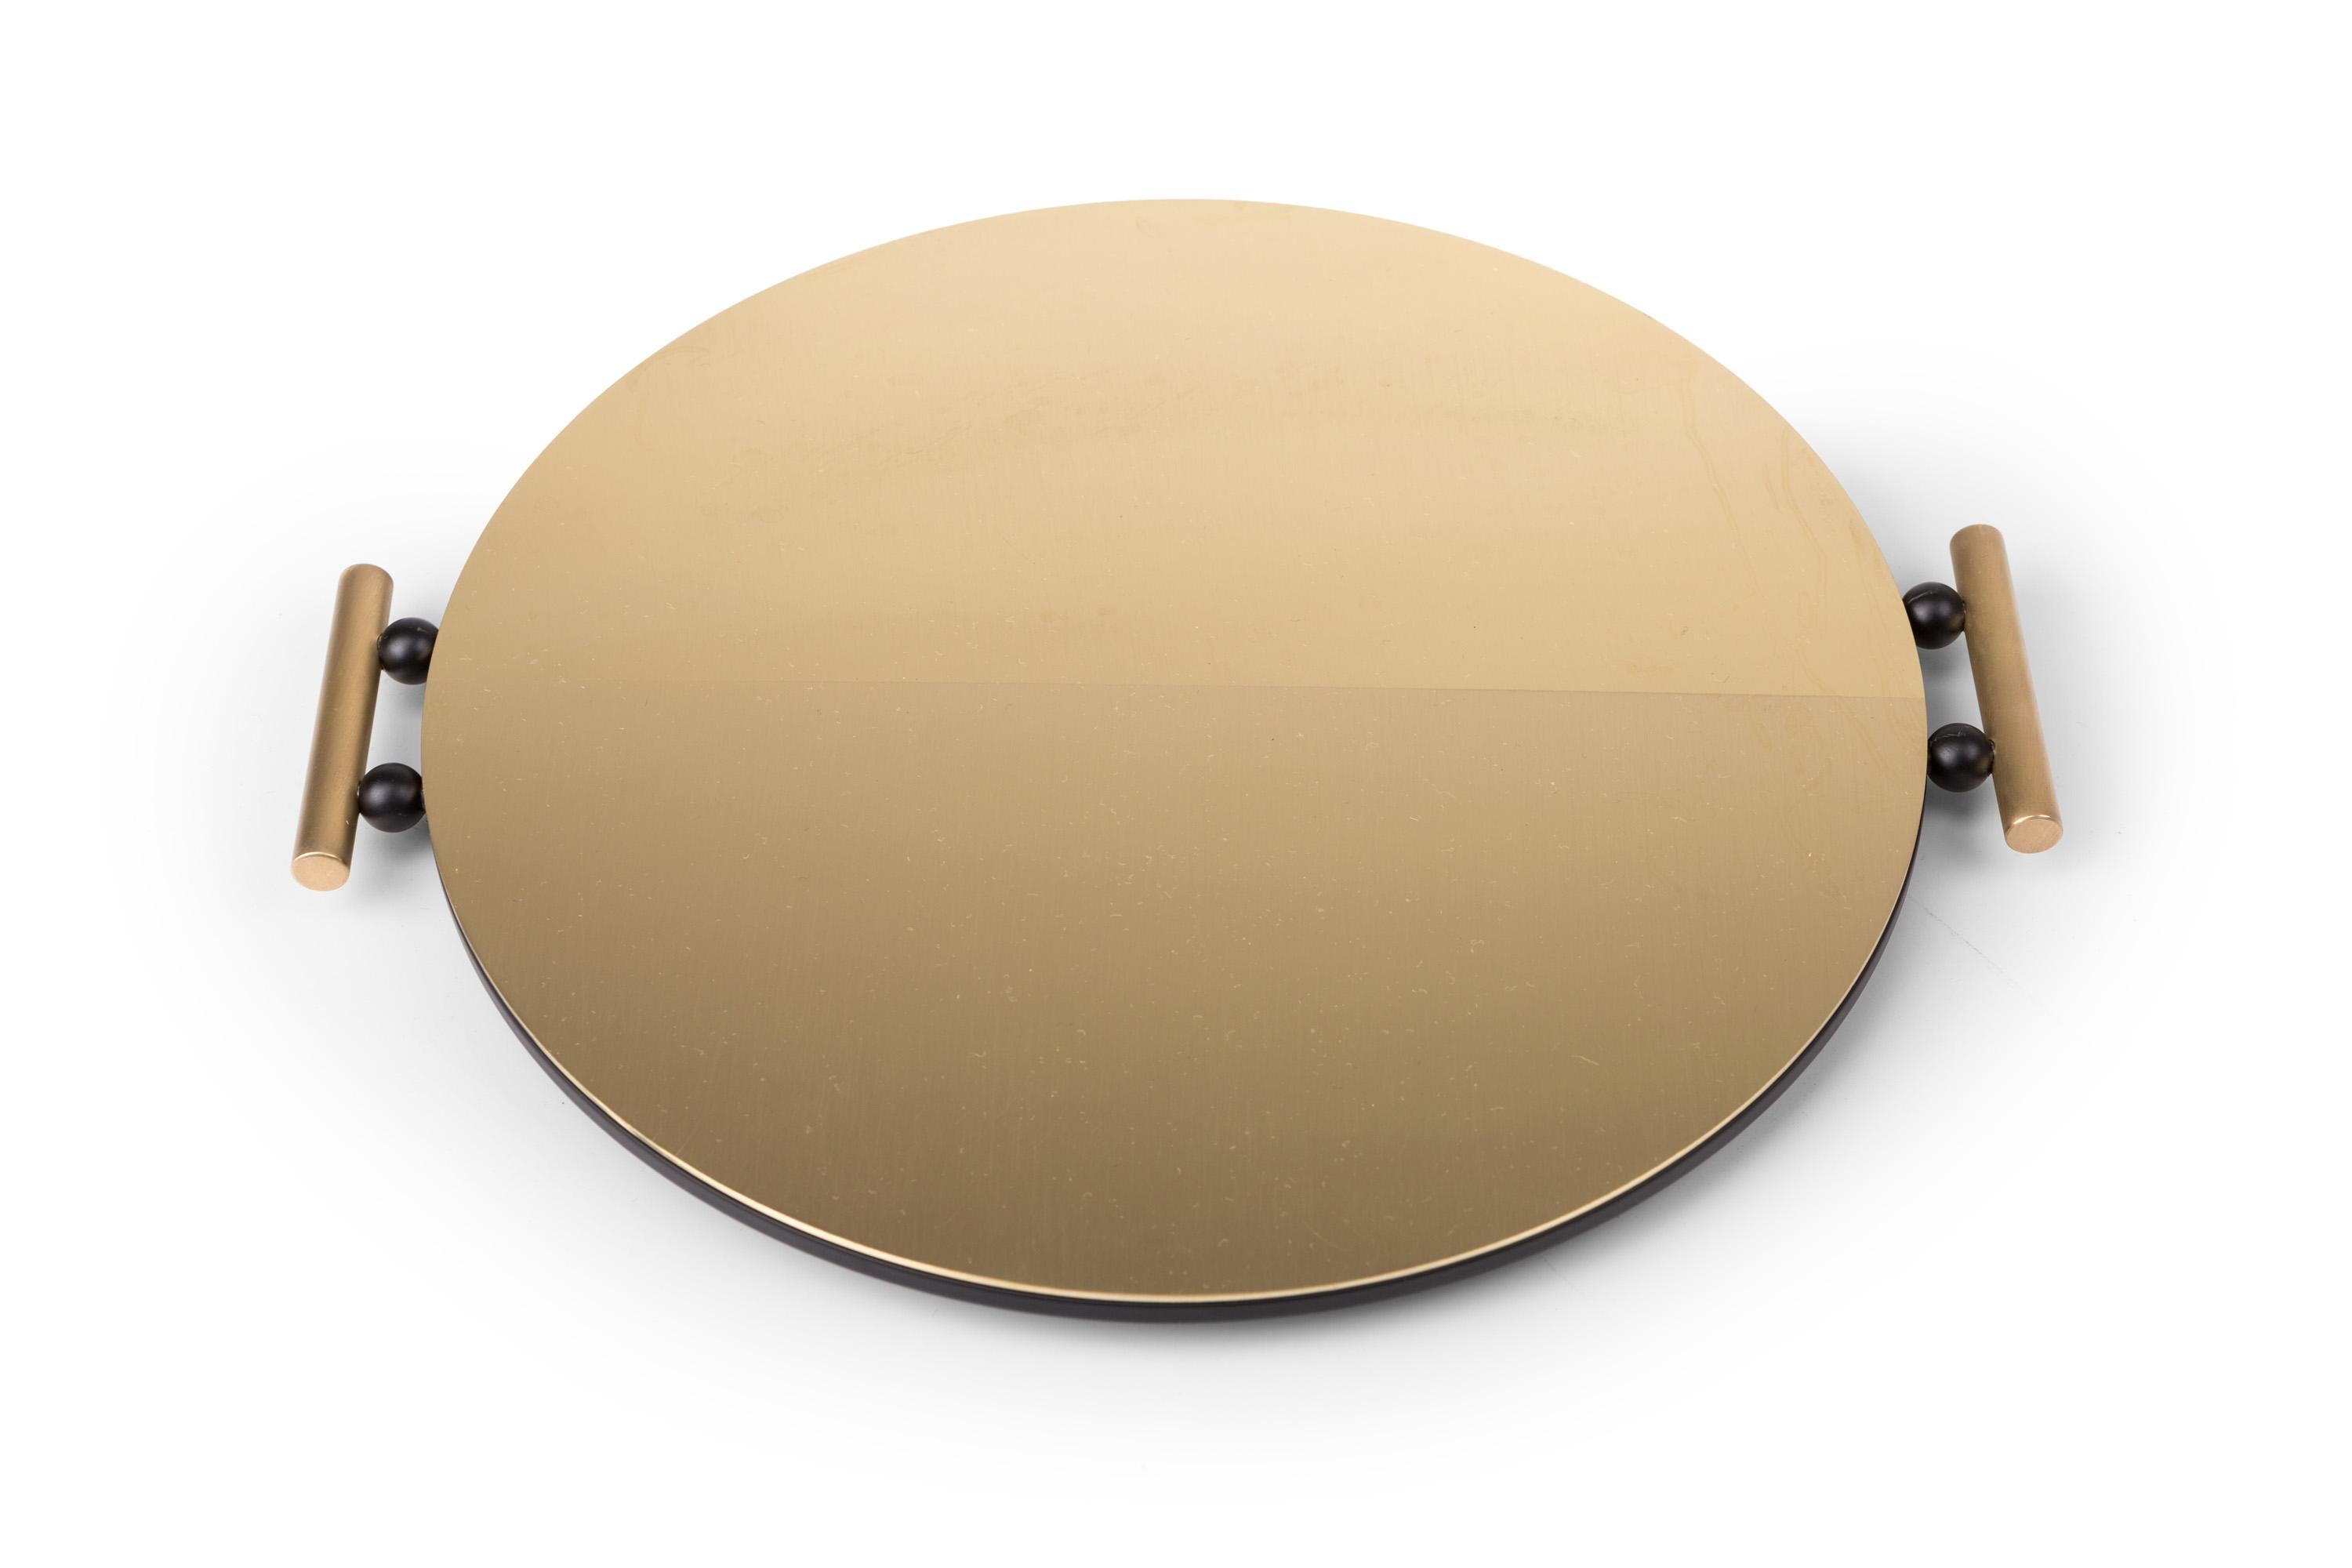 Satin tray round by Mingardo
Dimensions: D30 x W26 x H2 cm 
Materials: Natural brushed and polished brass with a RAL 9005 varnished iron base
Weight: 3 kg

Also available in Different finishes: Natural brushed and polished brass or
copper with